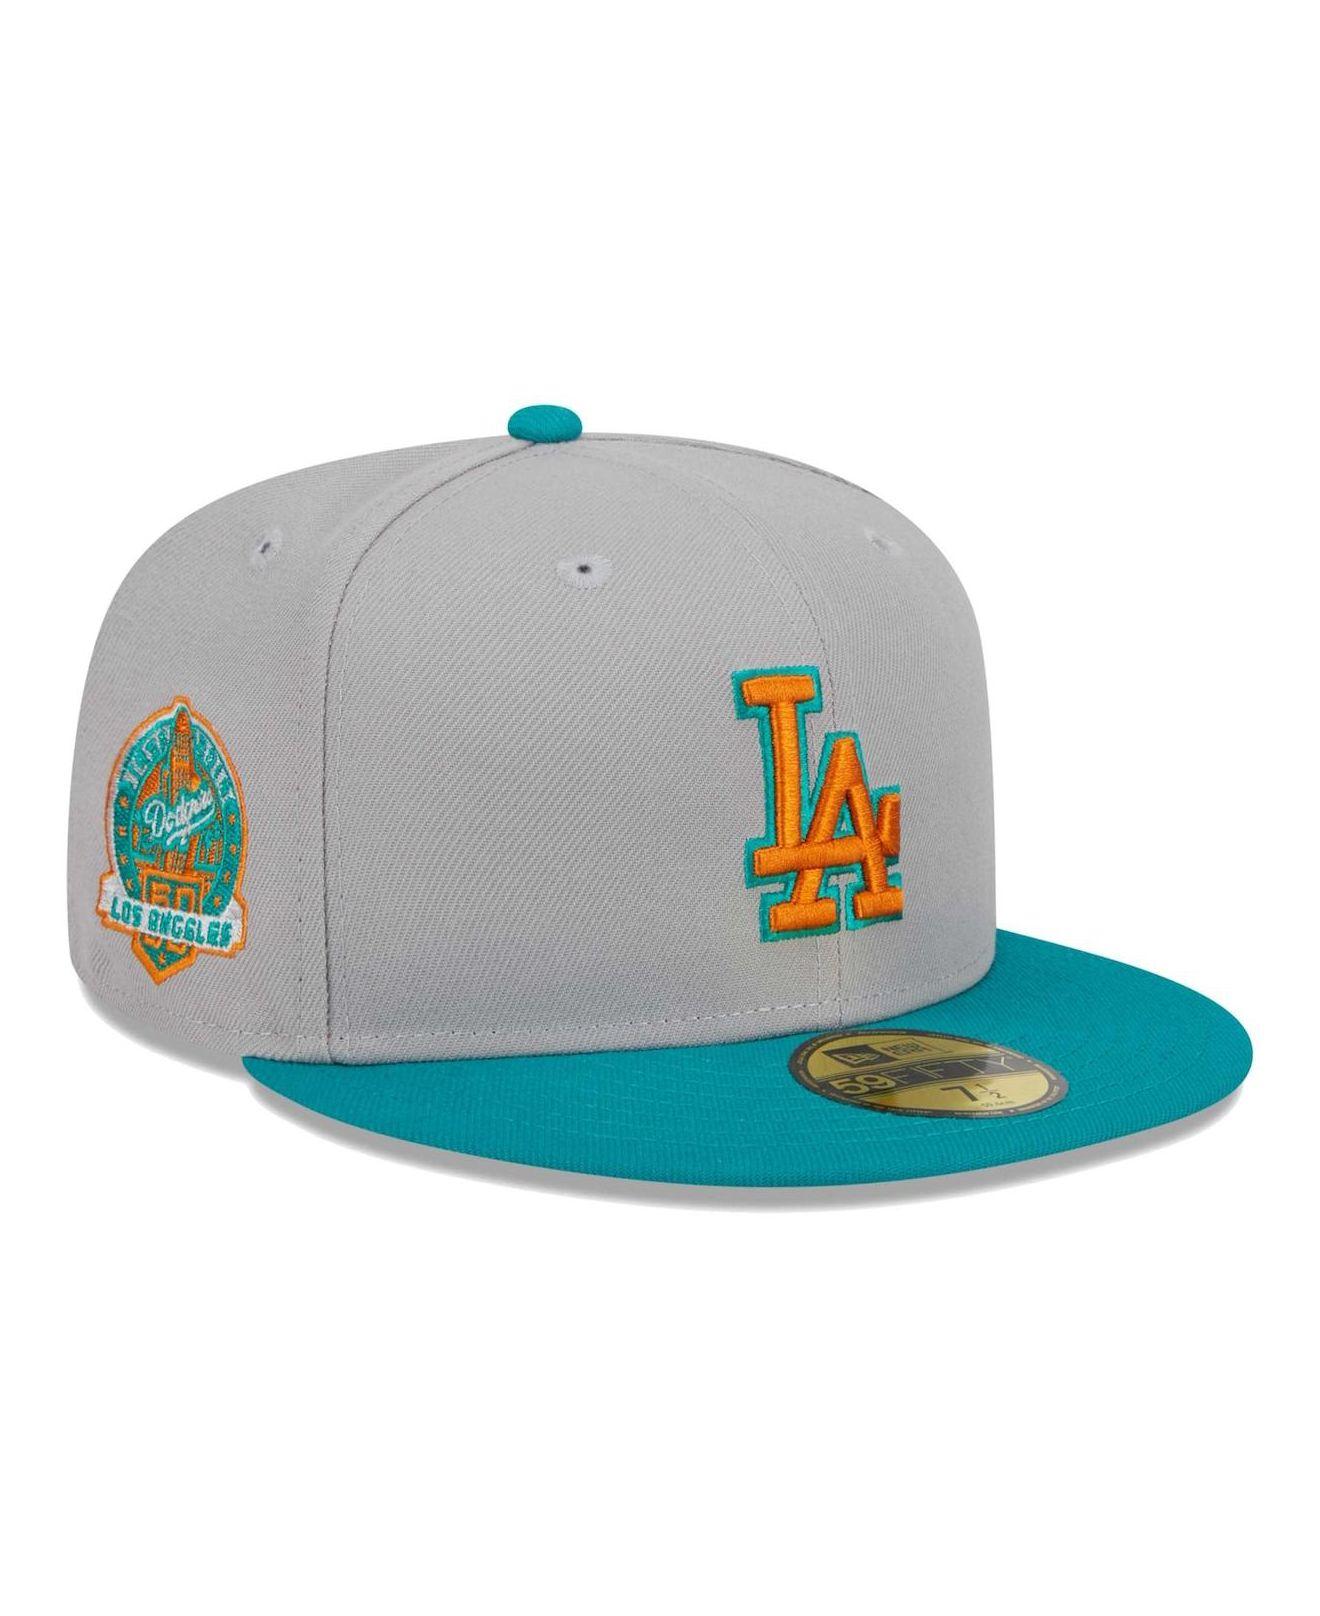 KTZ Los Angeles Dodgers Gold Stated 59fifty Fitted Cap in Black